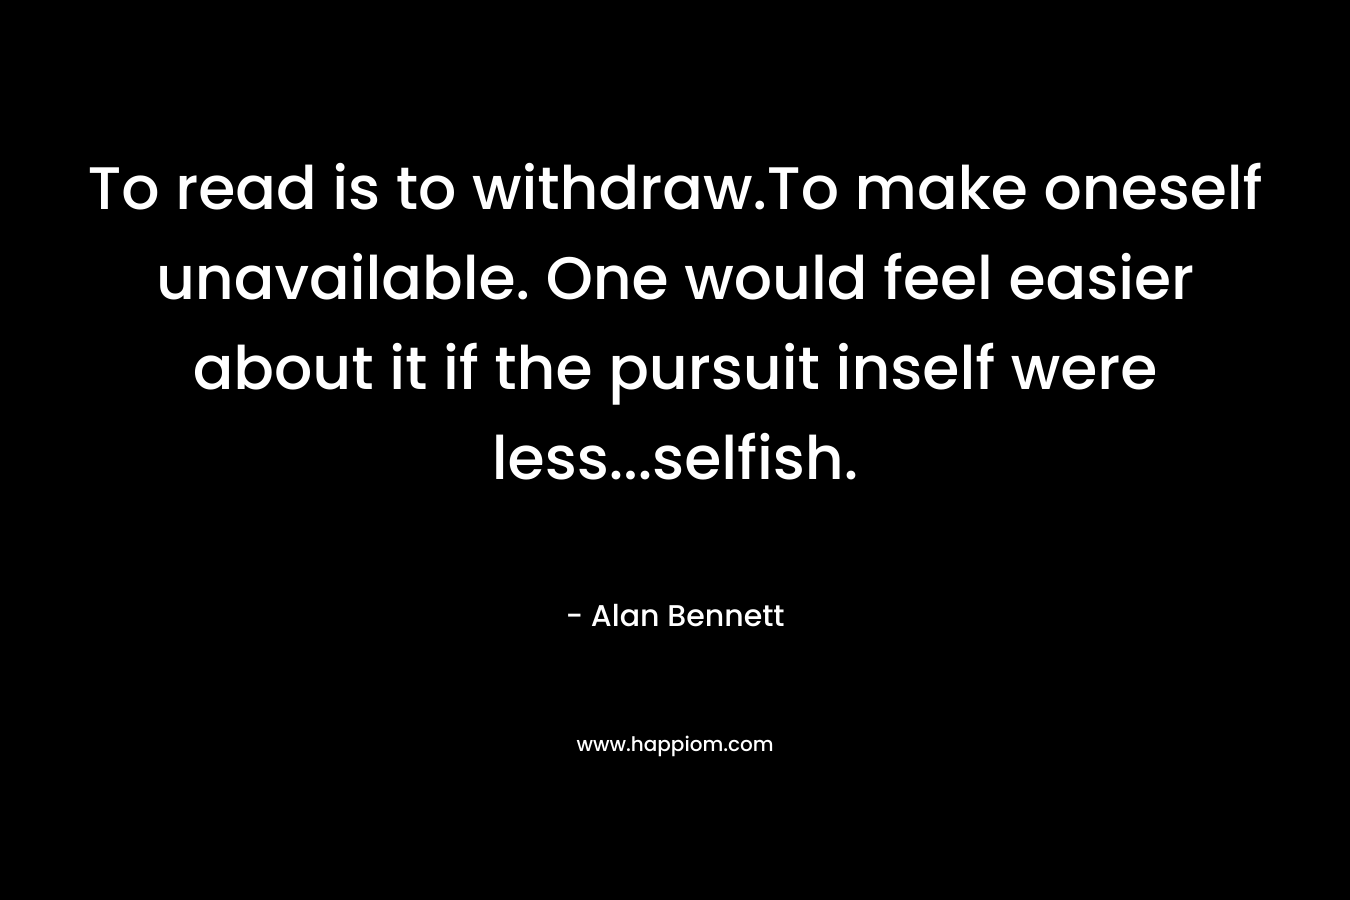 To read is to withdraw.To make oneself unavailable. One would feel easier about it if the pursuit inself were less…selfish. – Alan Bennett